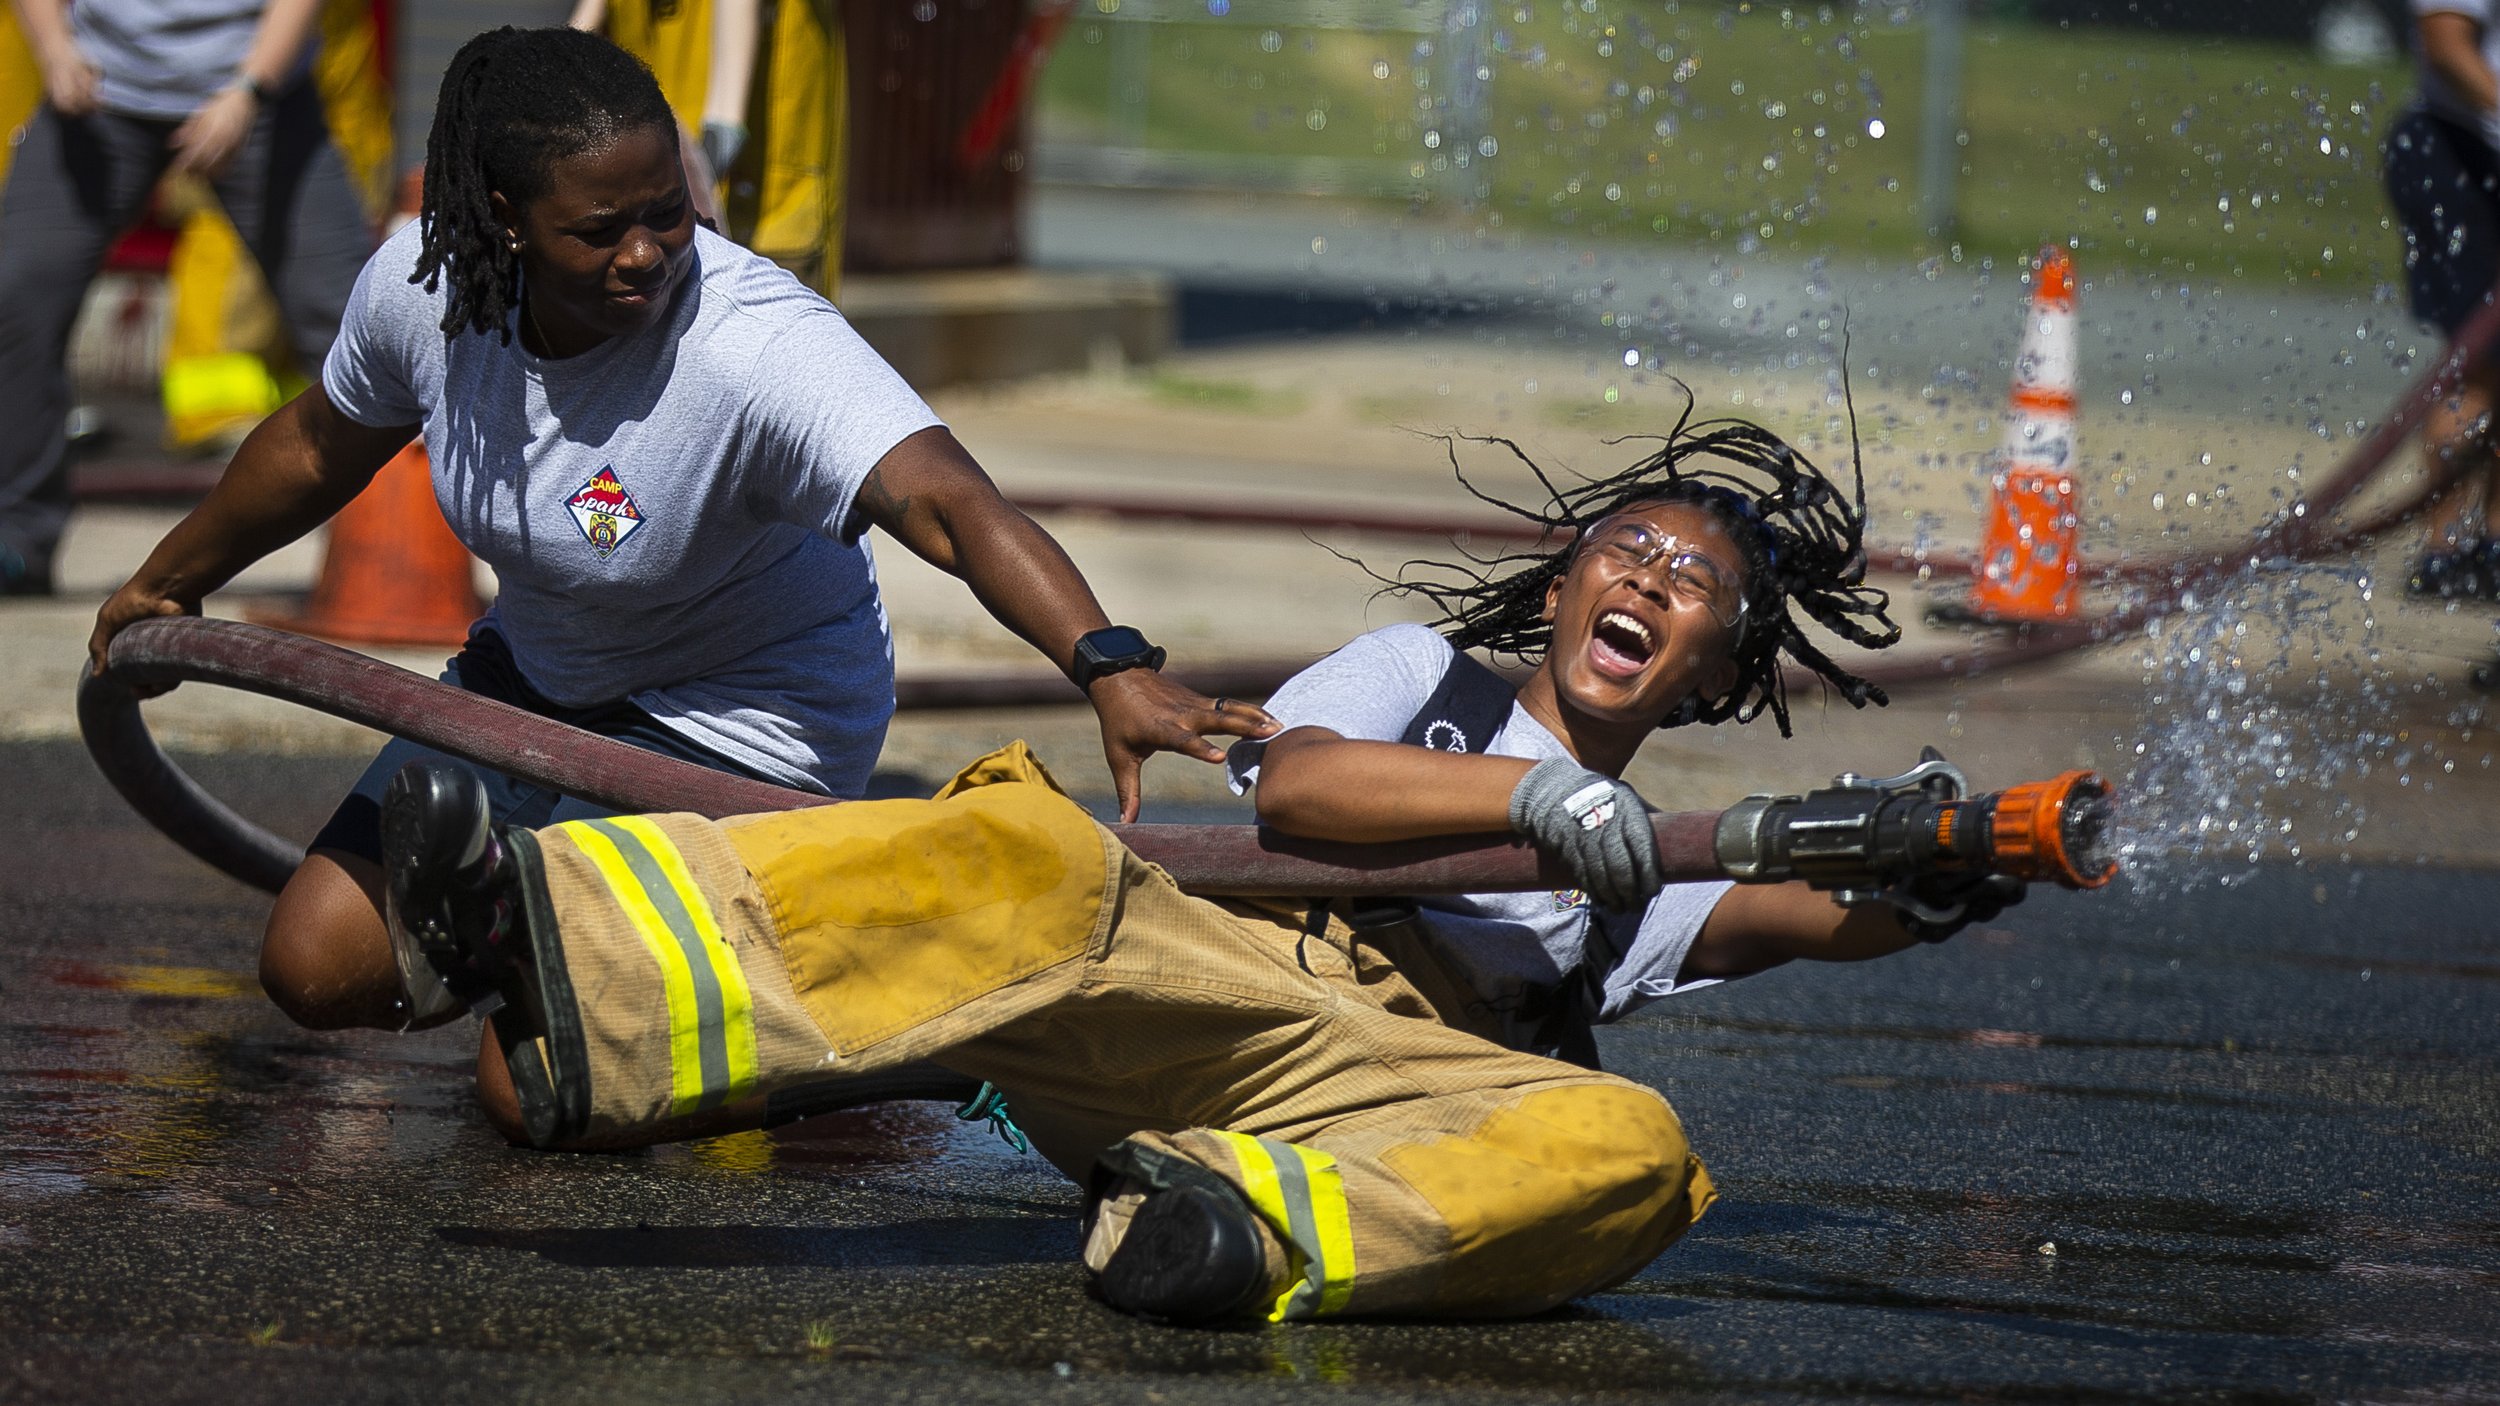  Nebaeh Murphy is knocked back by the force of the hose while training hose deployment during the first day of Camp Spark at the Greensboro Fire Department's training grounds in Greensboro, N.C., on Monday, July 12, 2021.   Camp Spark, a free four da